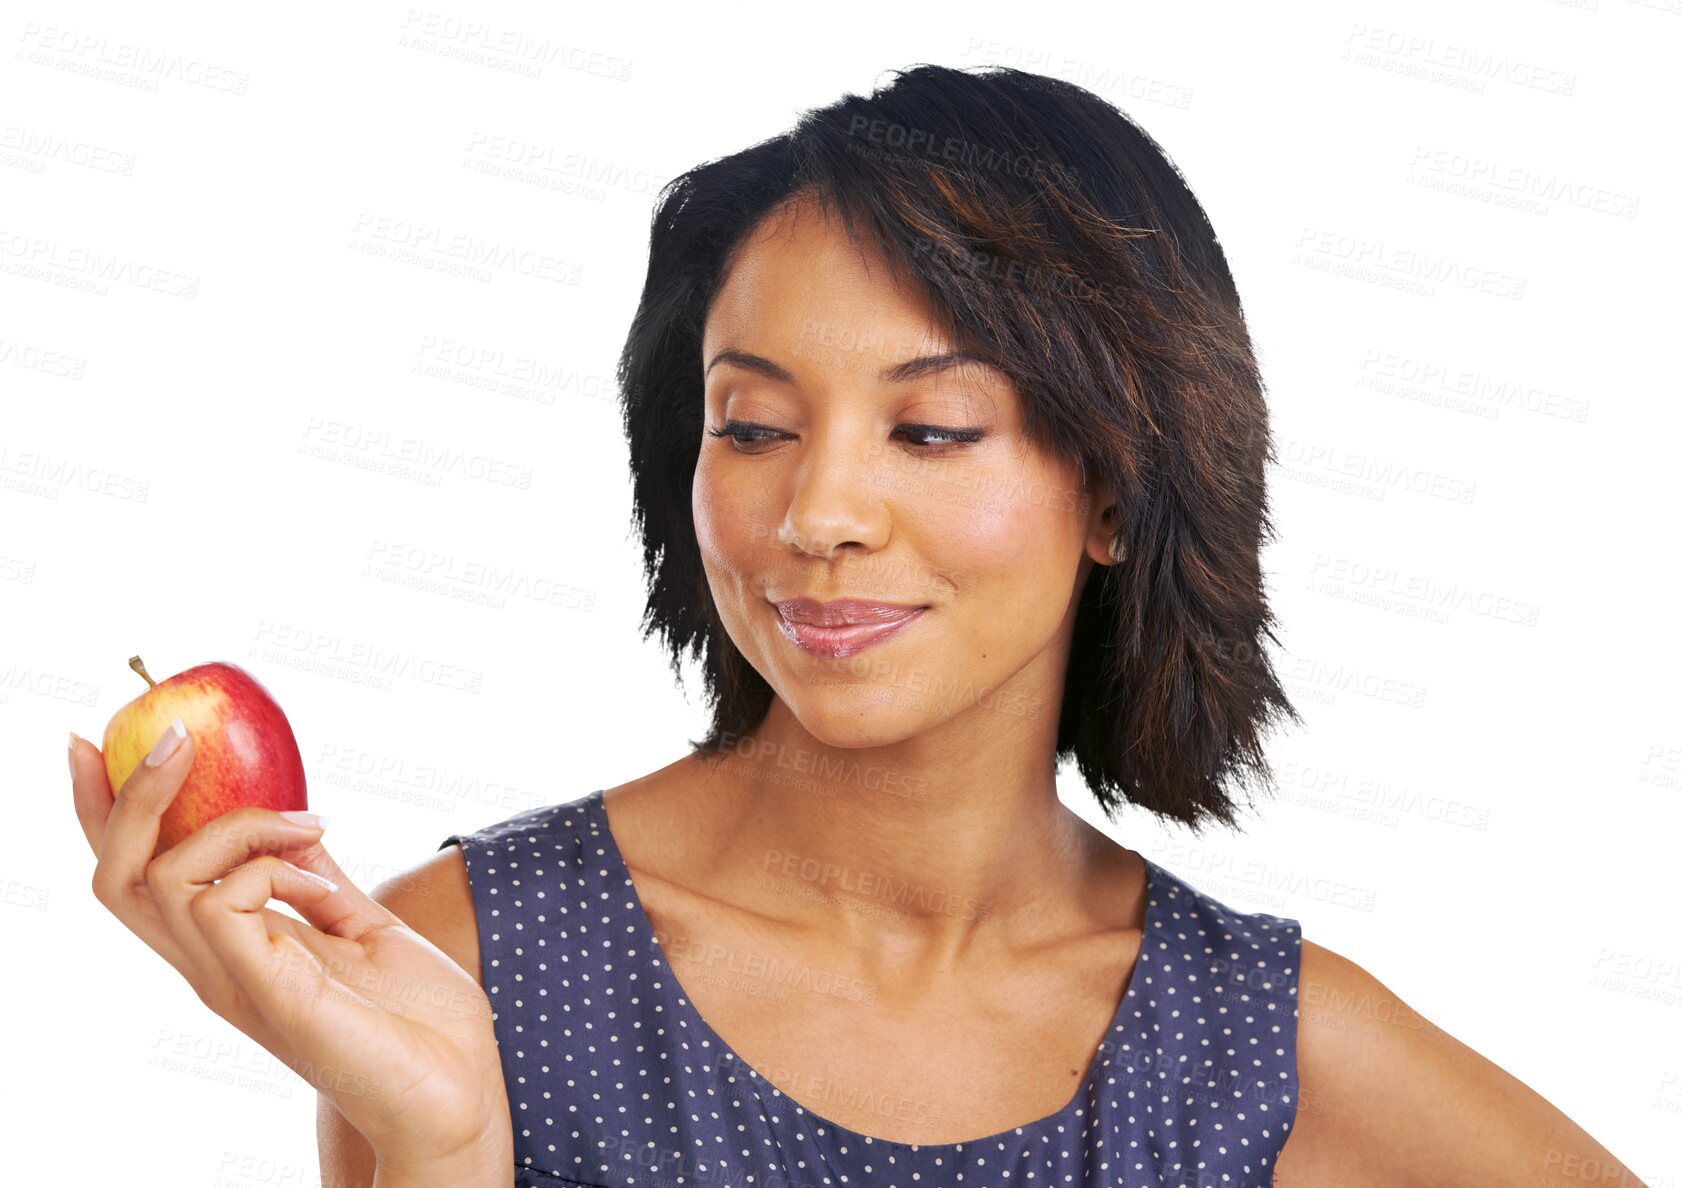 Buy stock photo Apple, thinking or woman with fruit decision, health choice or contemplating wellness product for healthy living idea. Benefits, health food or female model isolated on a transparent, png background
